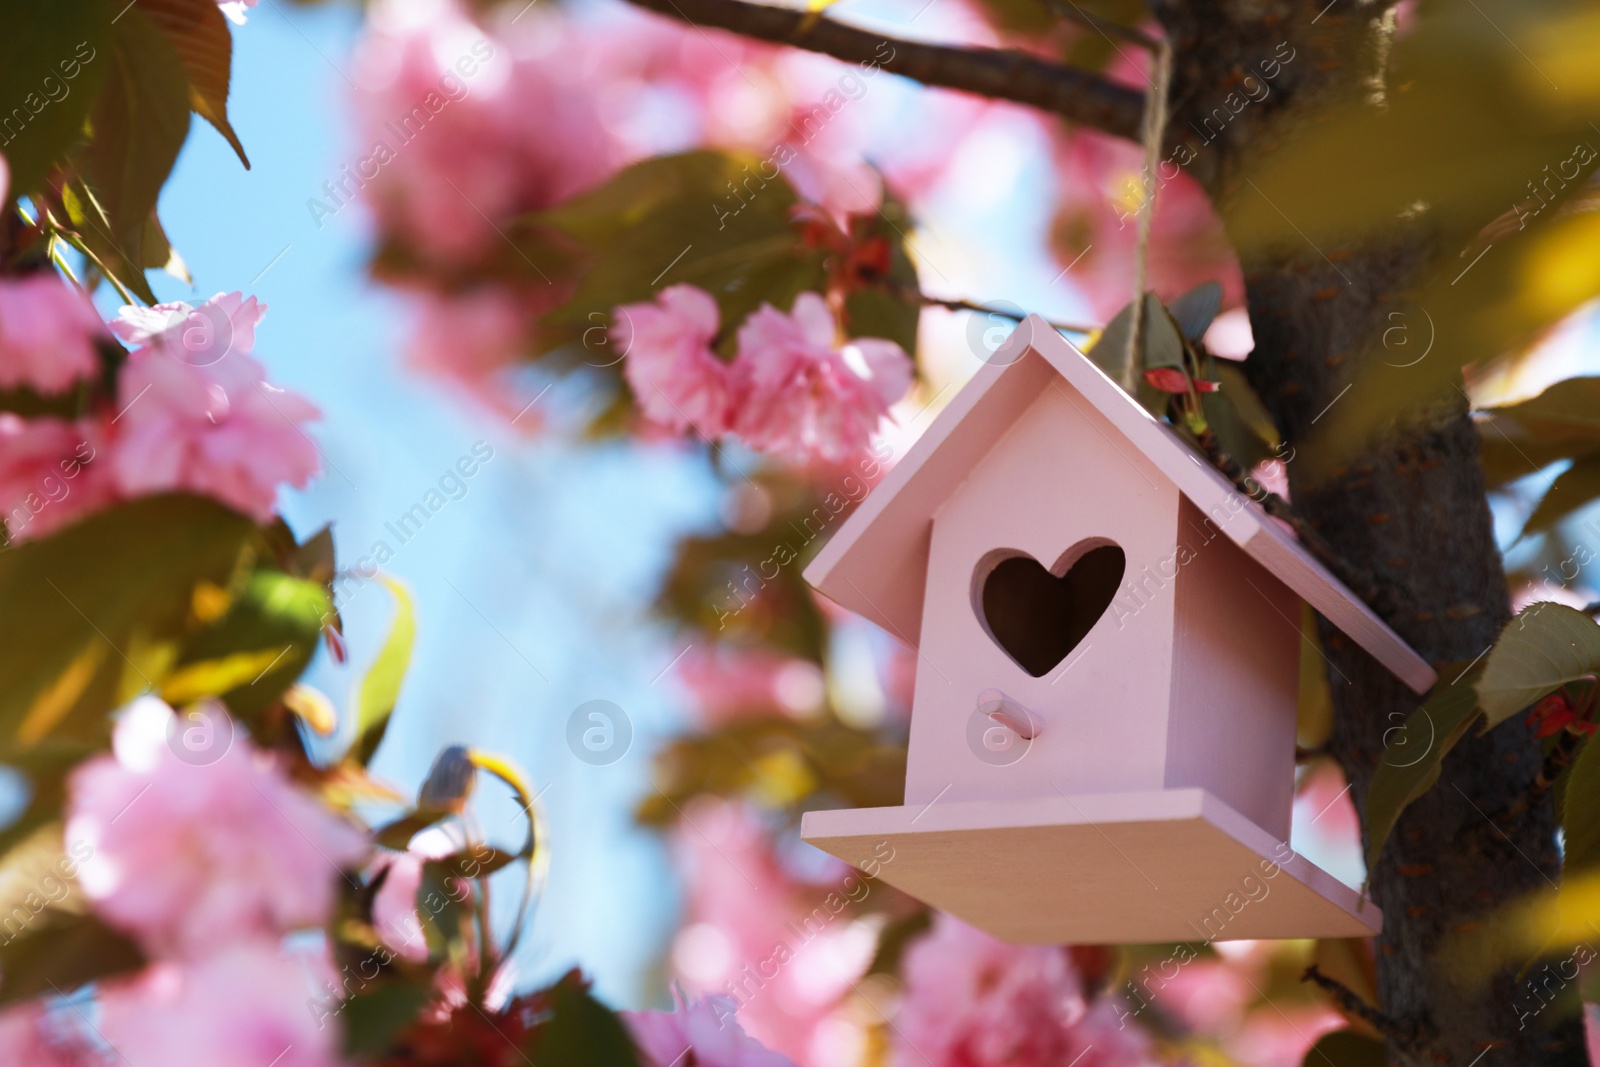 Photo of Pink bird house with heart shaped hole hanging on tree branch outdoors. Space for text